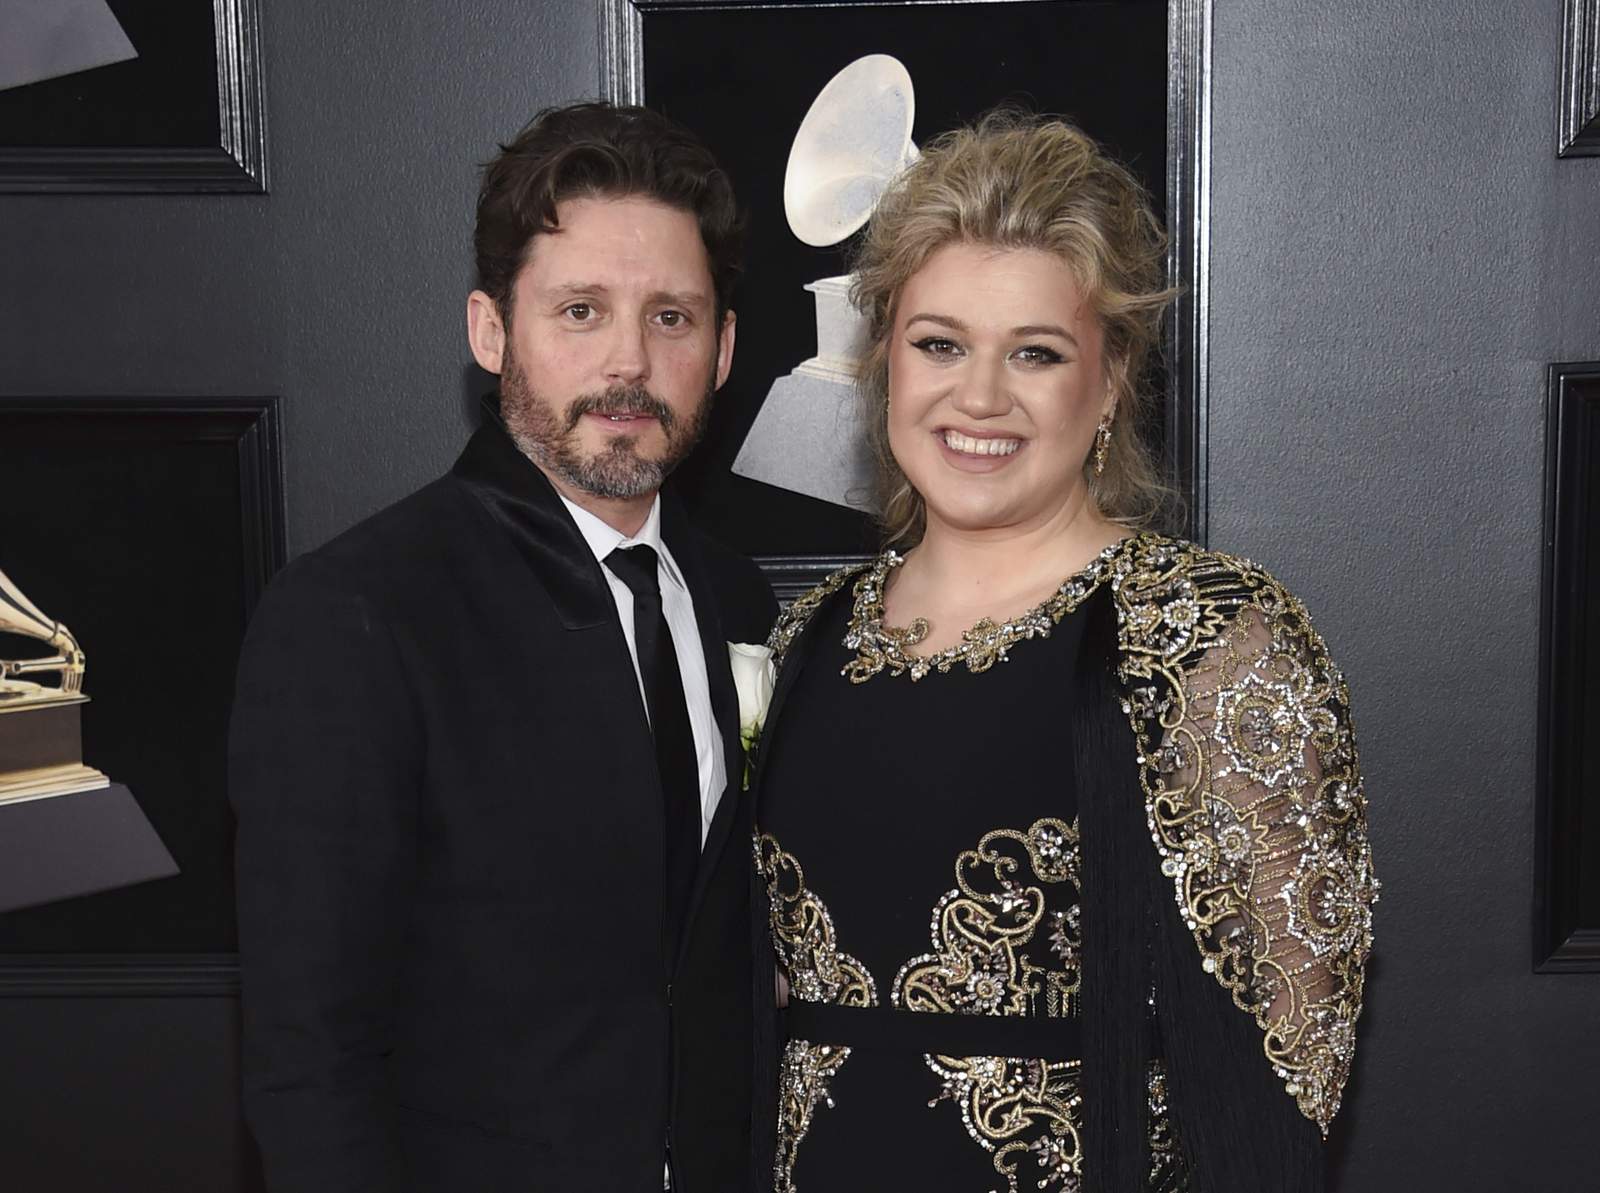 Kelly Clarkson seeks divorce from husband of nearly 7 years